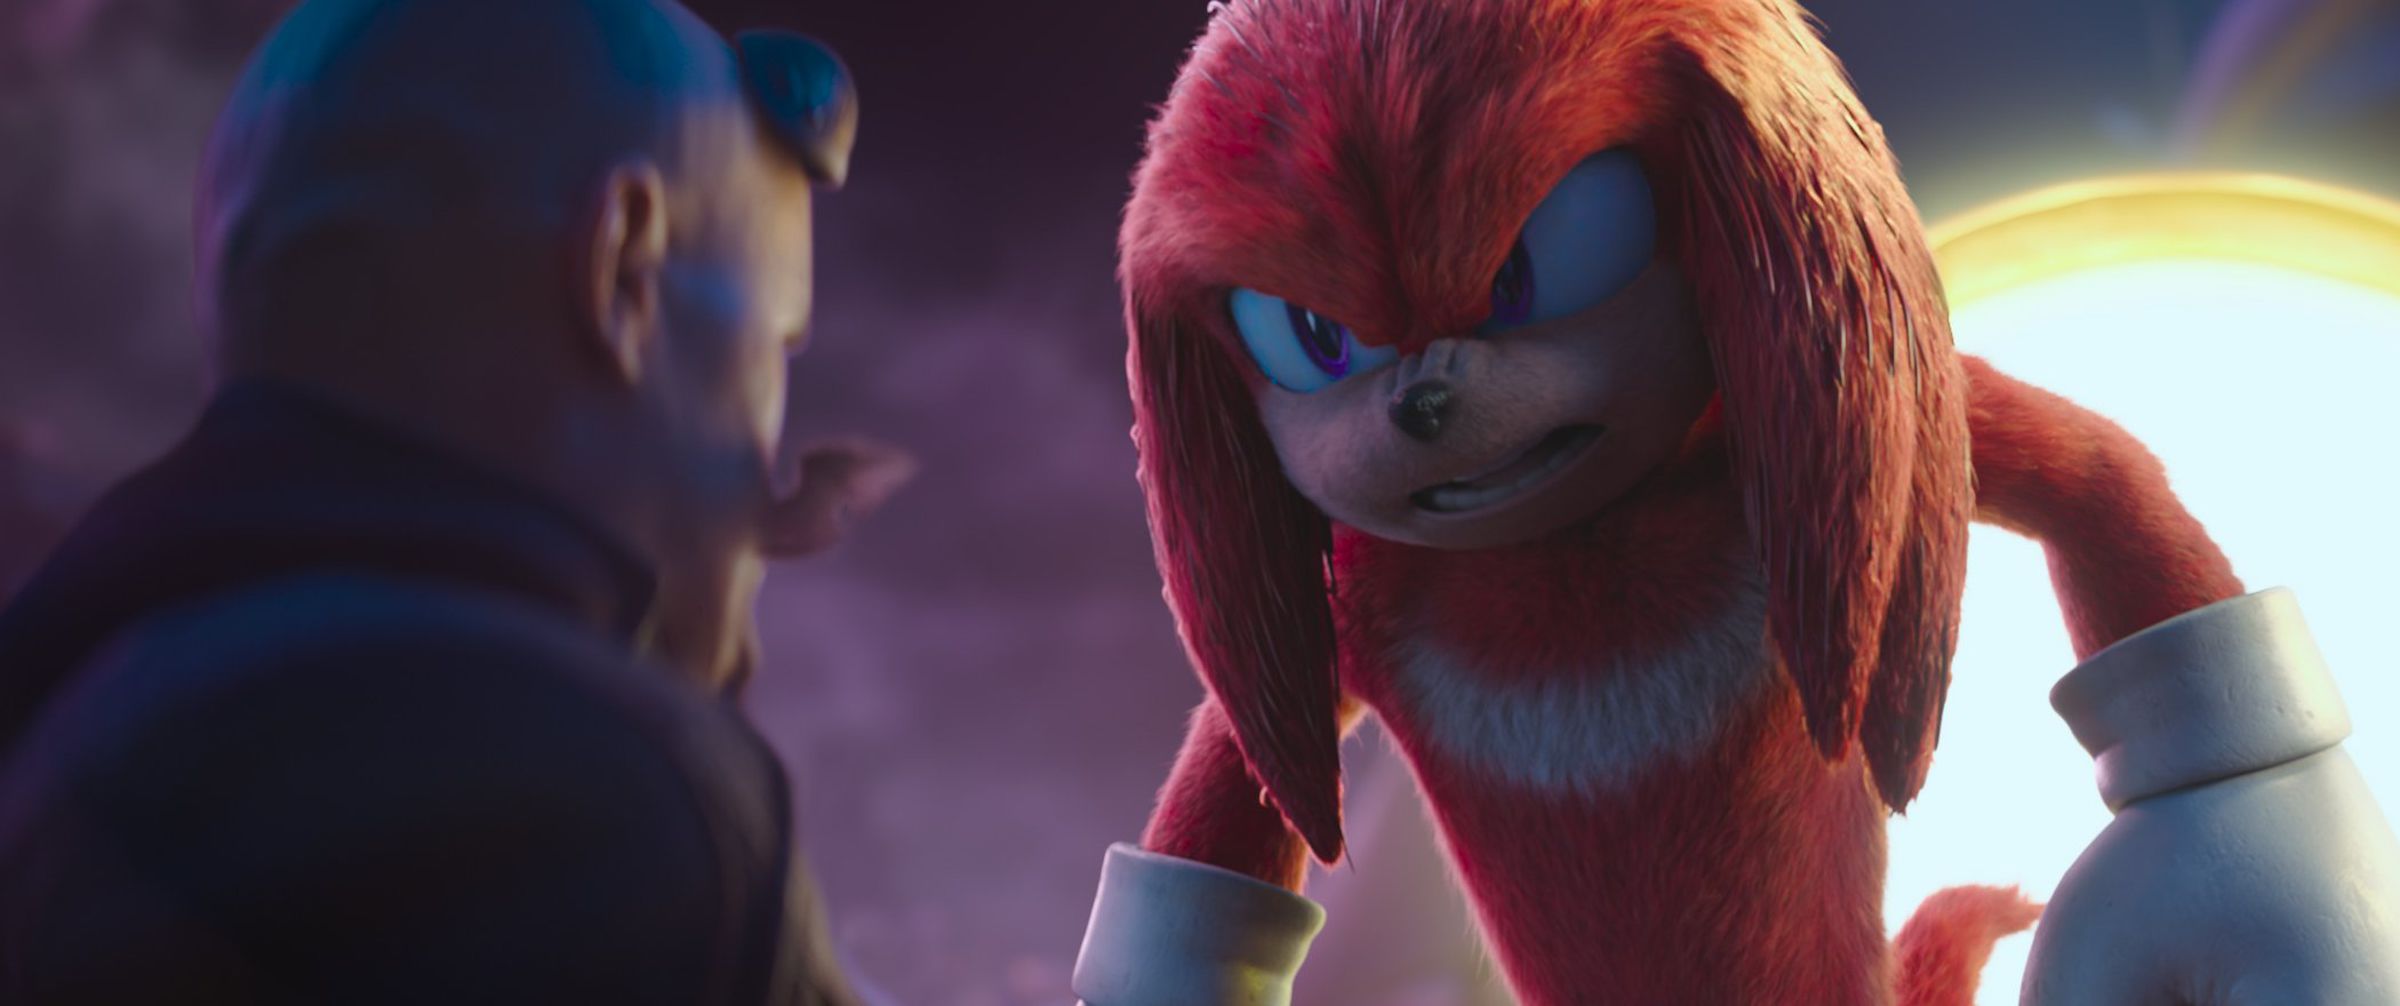 Knuckles meeting Robotnik for the first time.